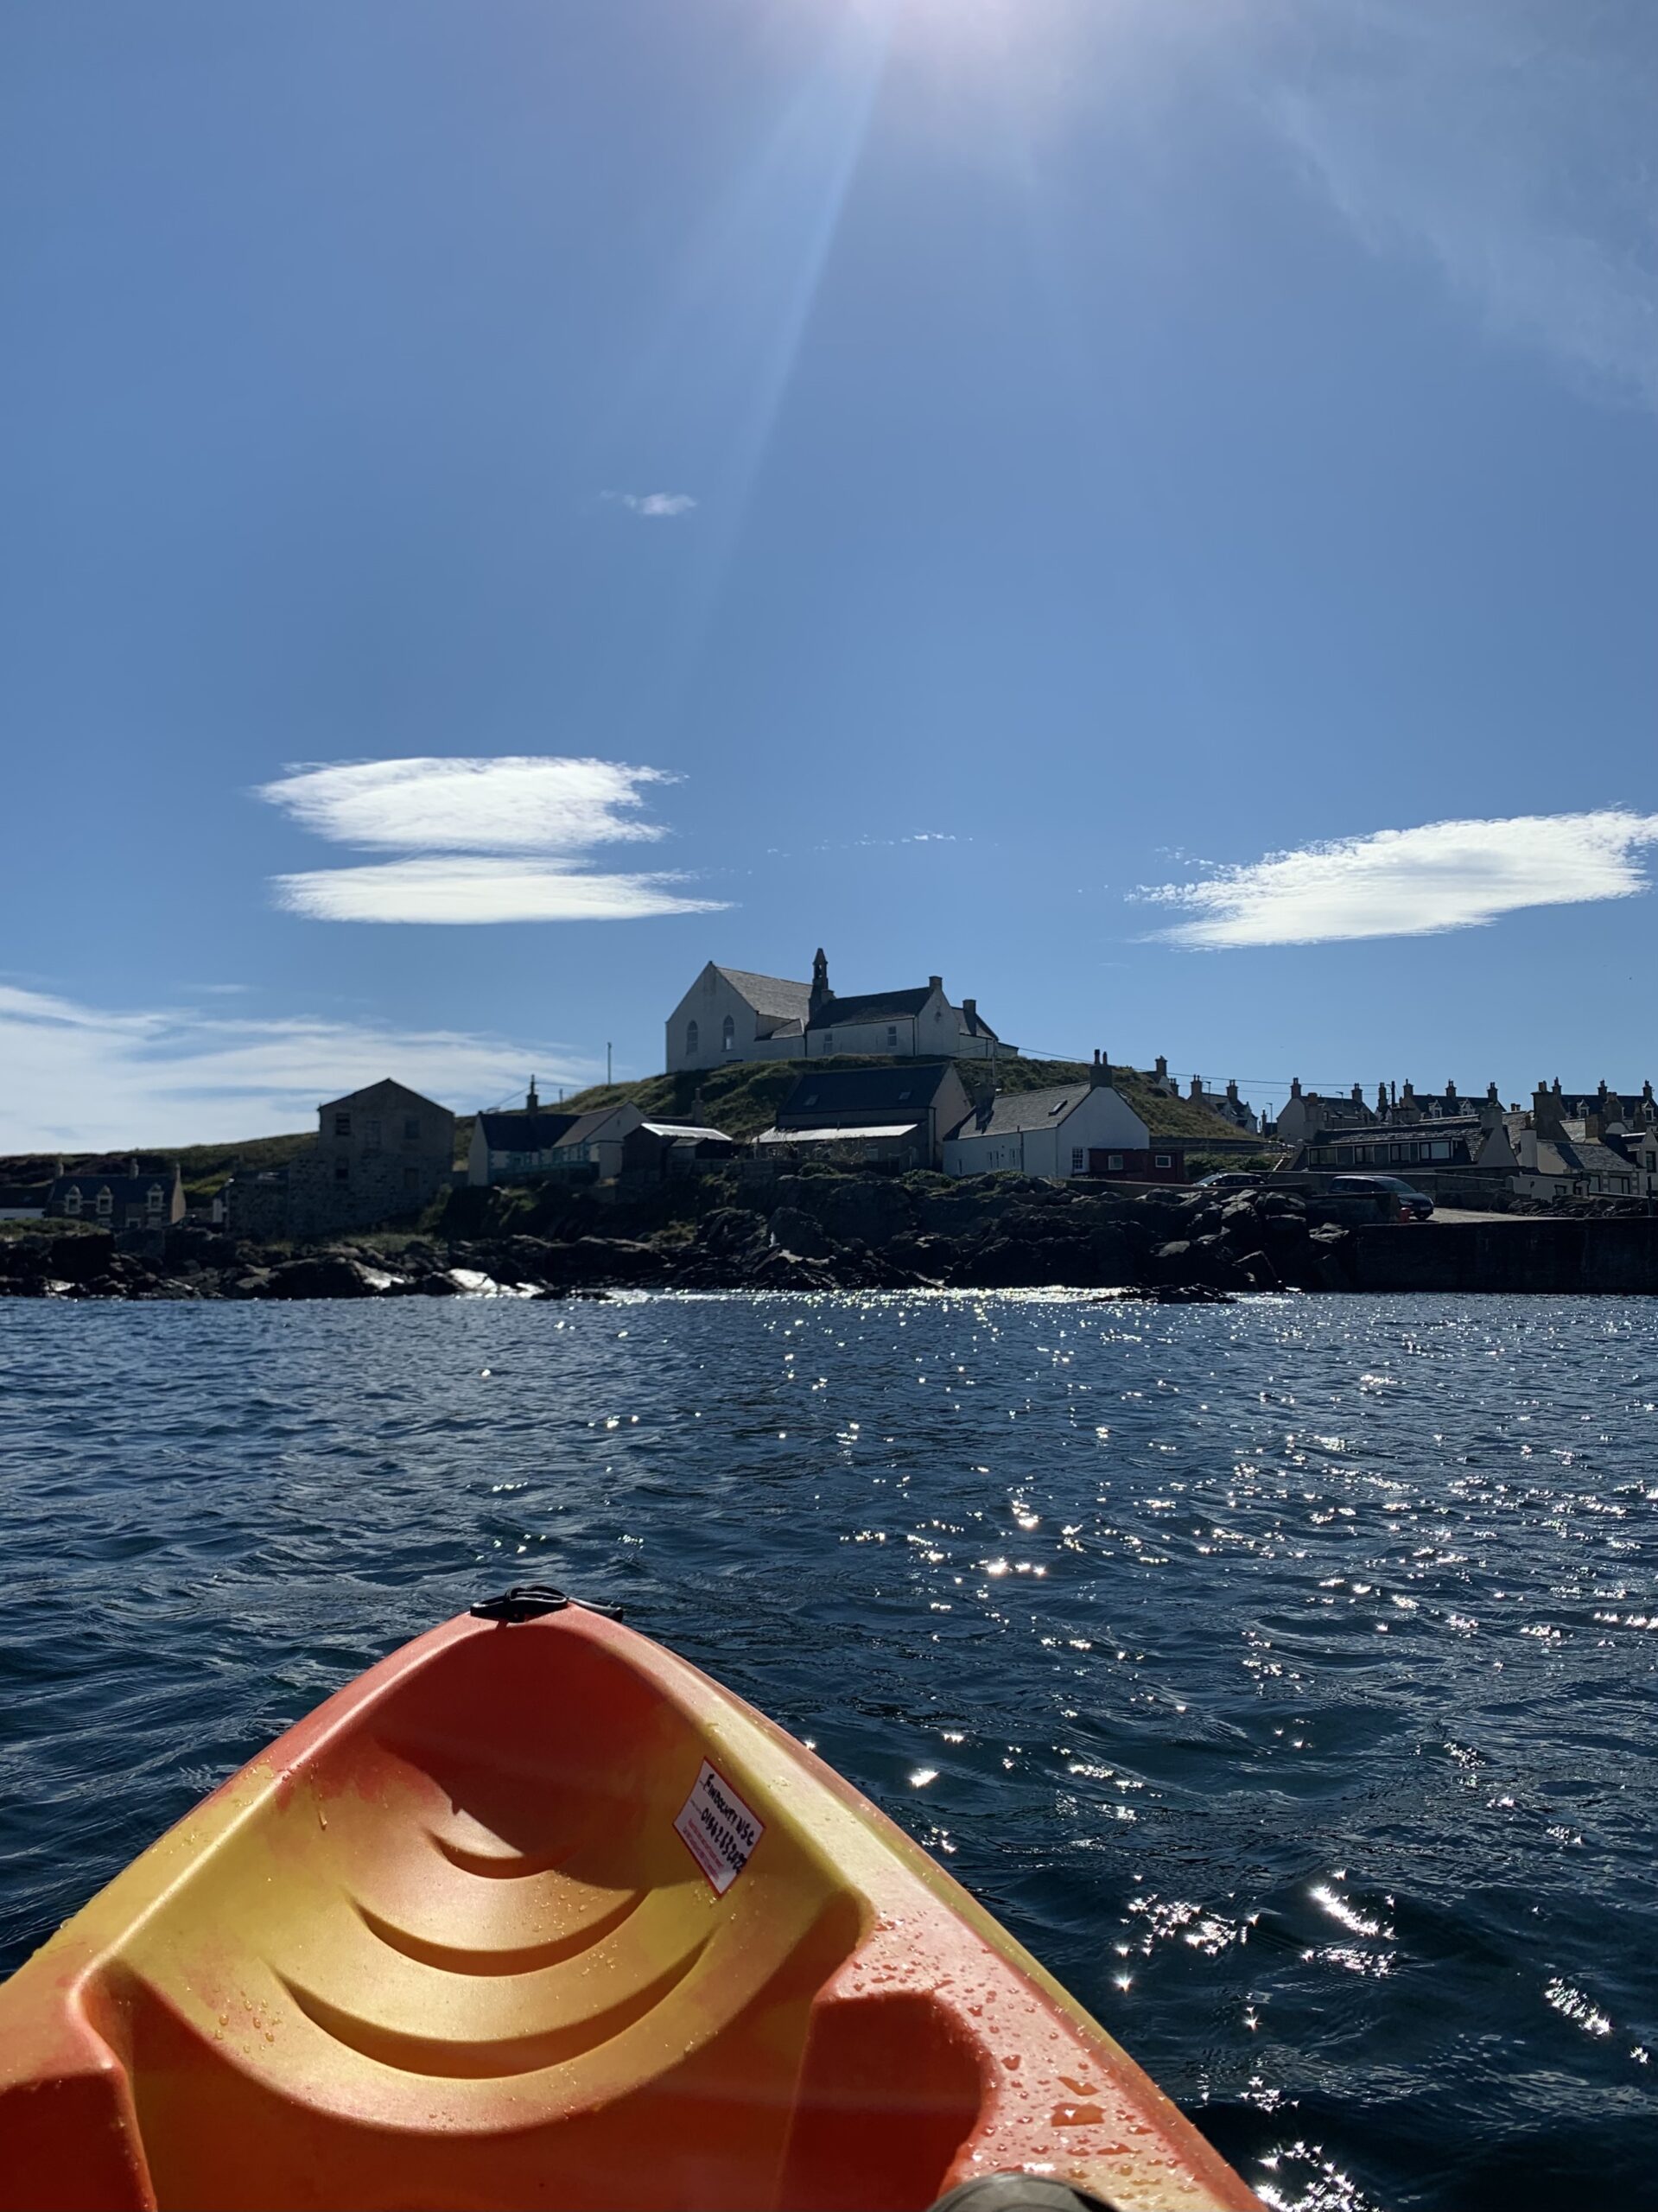 Sea kayak on the water in front of Findochty Church of Scotland